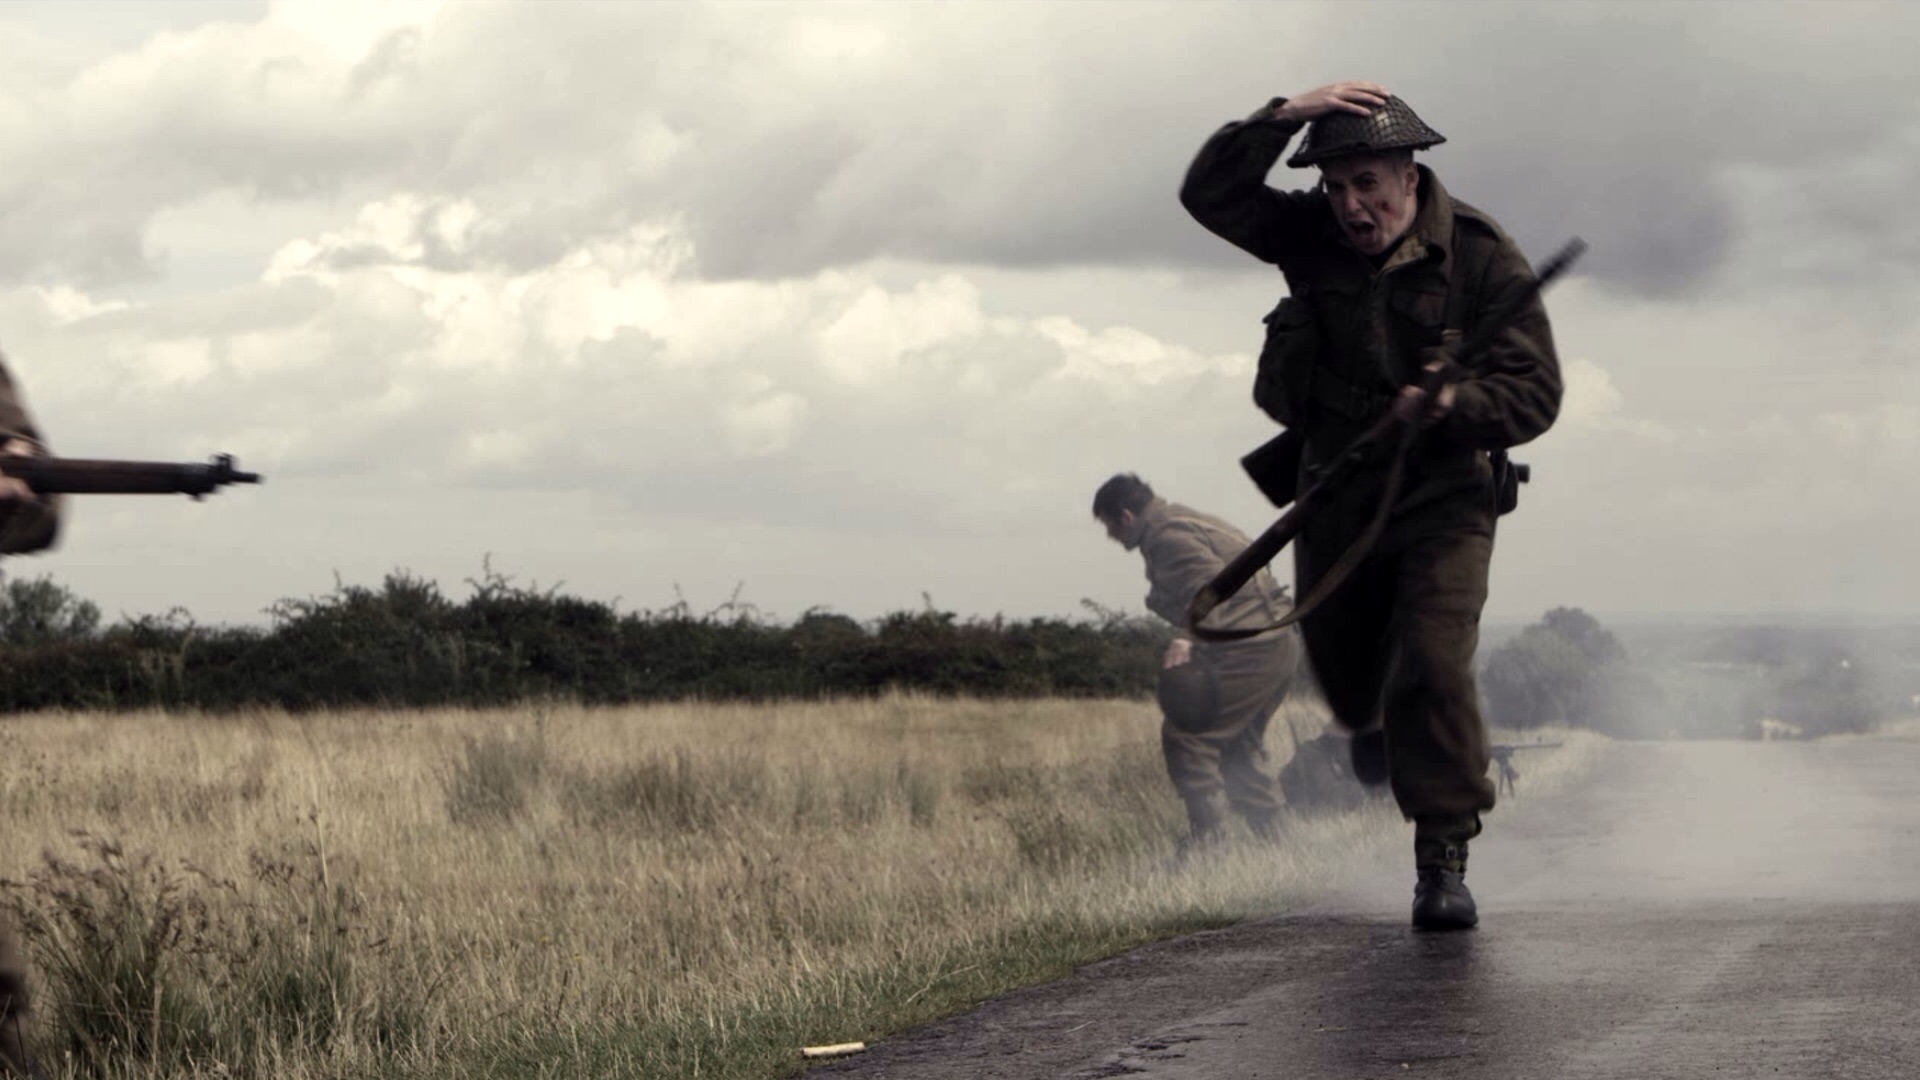 Still from WW2 film 'Our Father' 2014